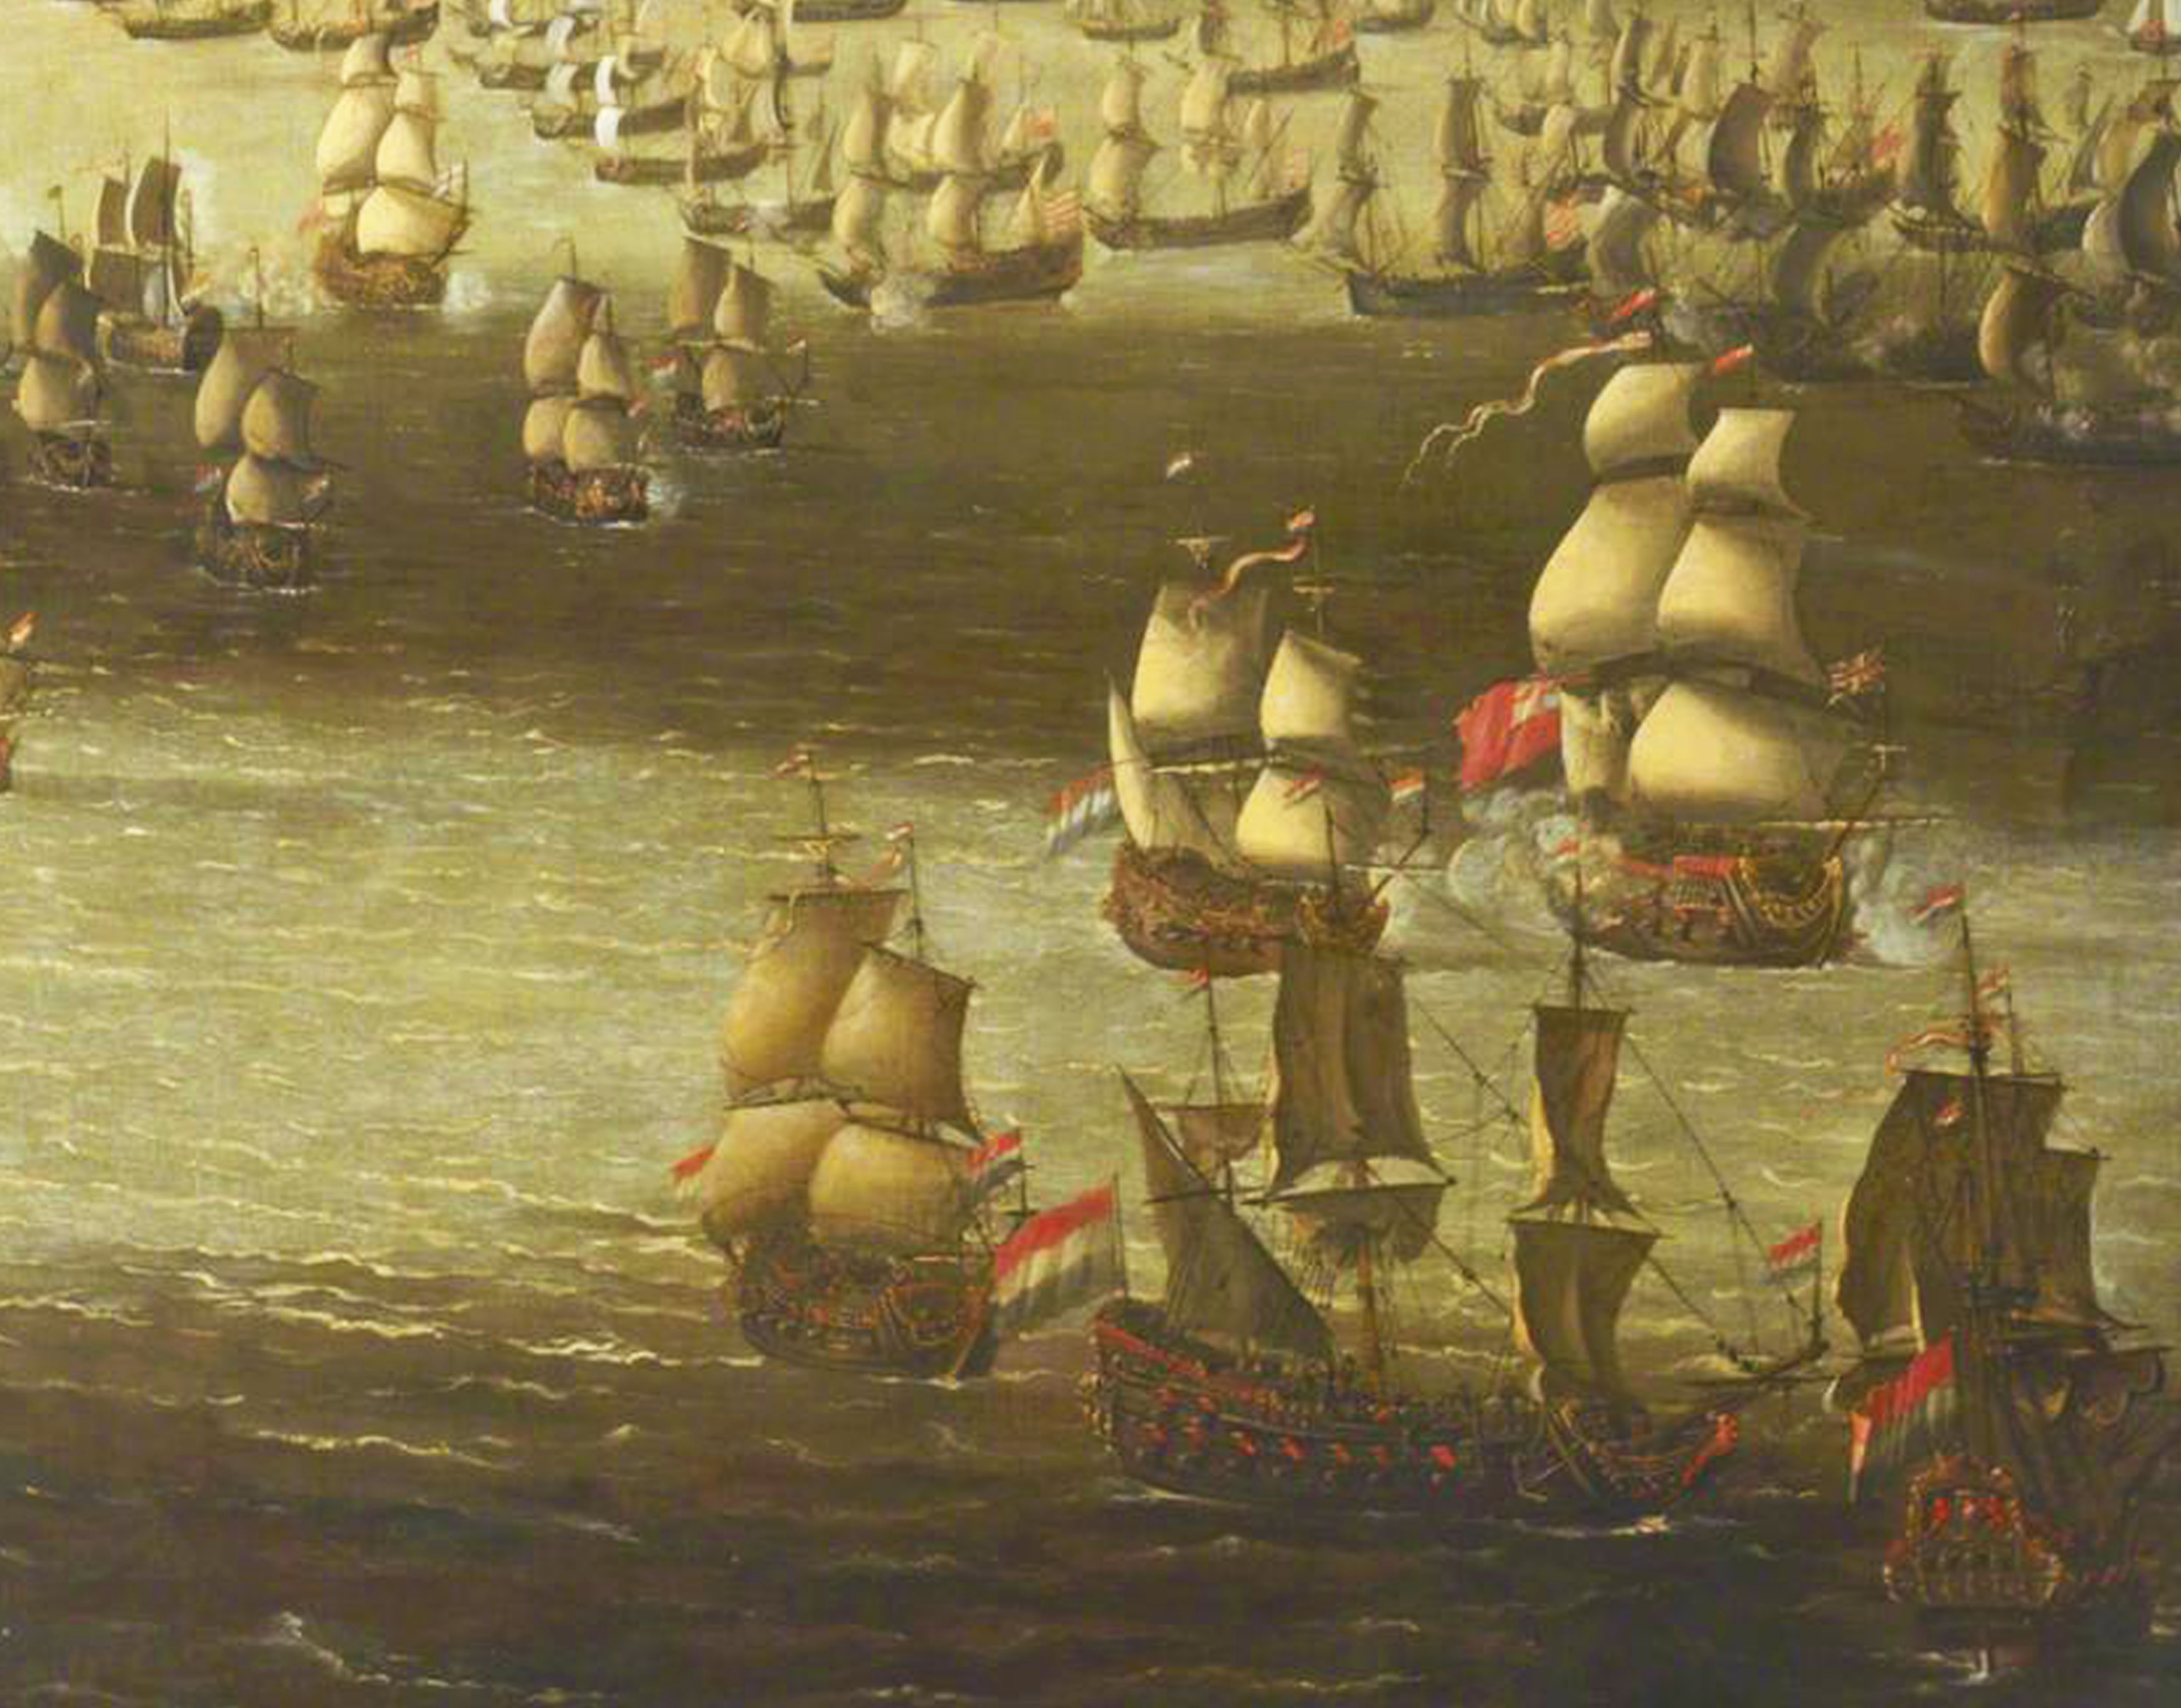 Schellinks, Daniel; HMS 'Tiger' Attacked by Eight Dutch Privateers, 26 August 1672; National Maritime Museum; http://www.artuk.org/artworks/hms-tiger-attacked-by-eight-dutch-privateers-26-august-1672-175498